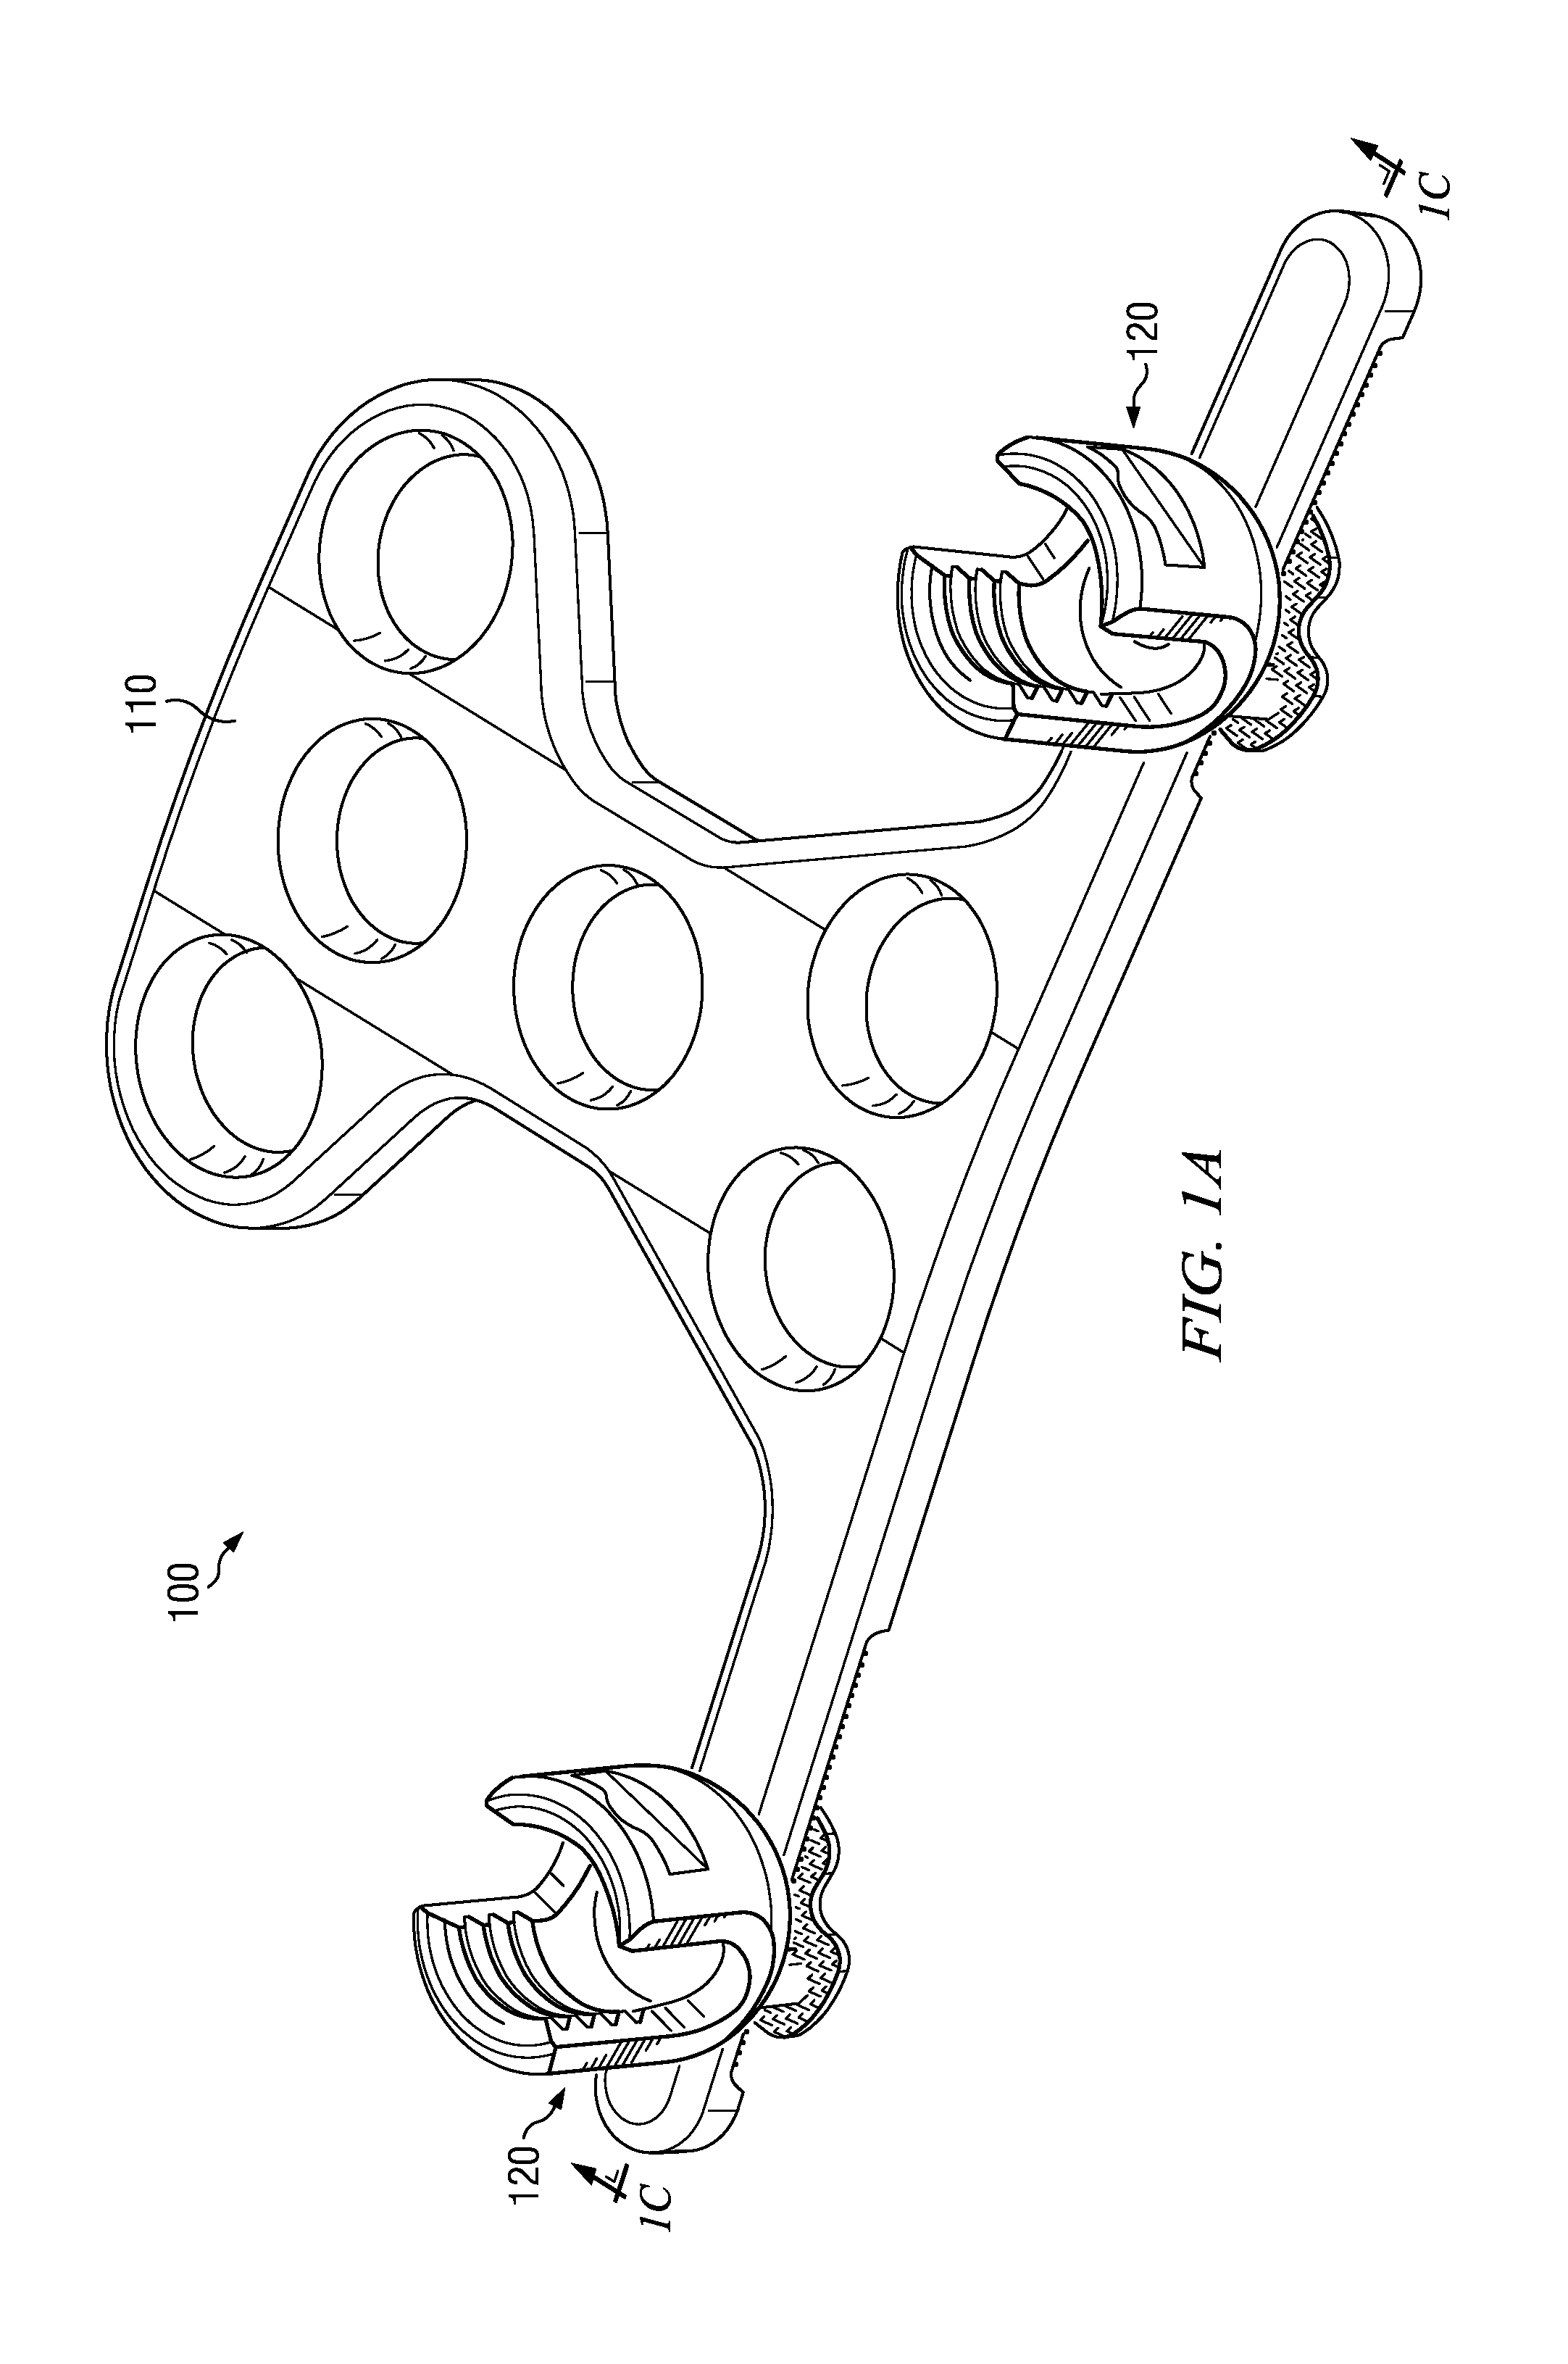 Occipito-cervical fixation assembly and method for constructing same